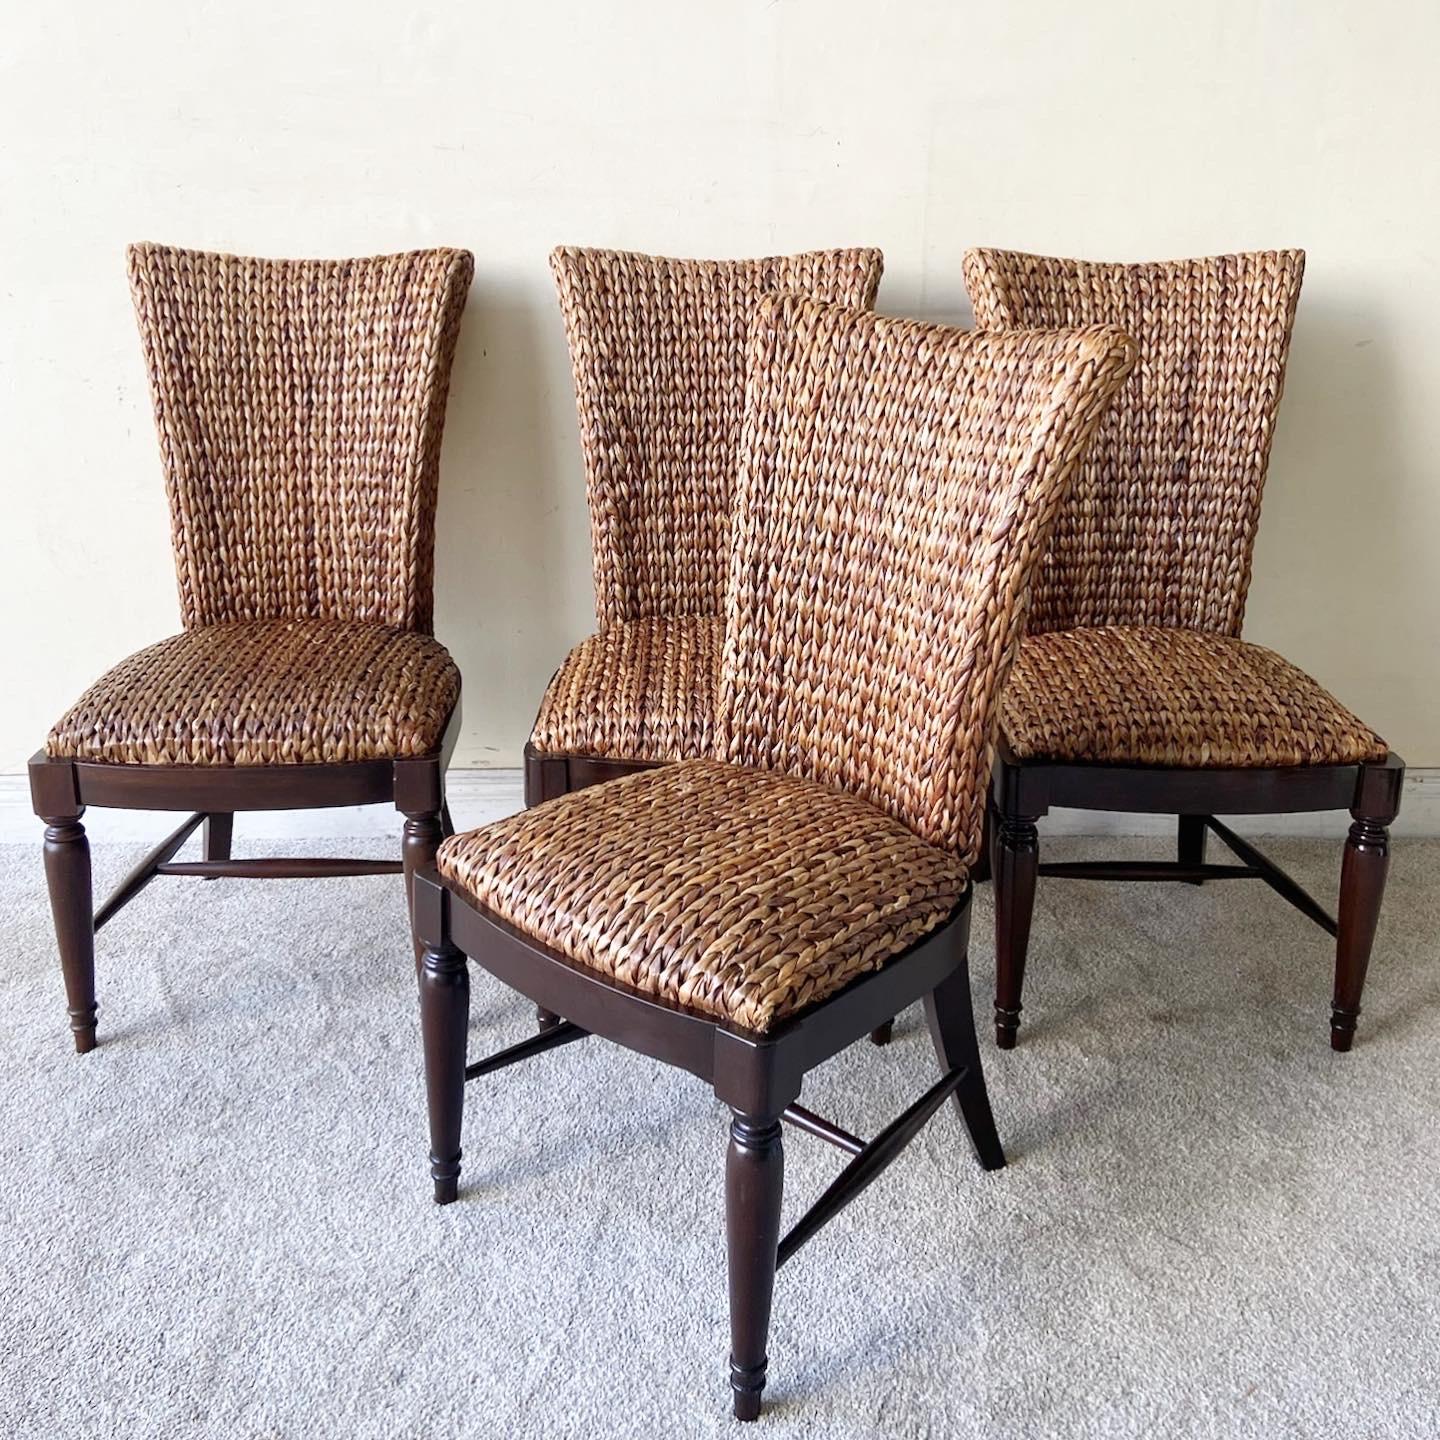 Boho Chic Woven Sea Grass Dining Chairs, Set of 4 2